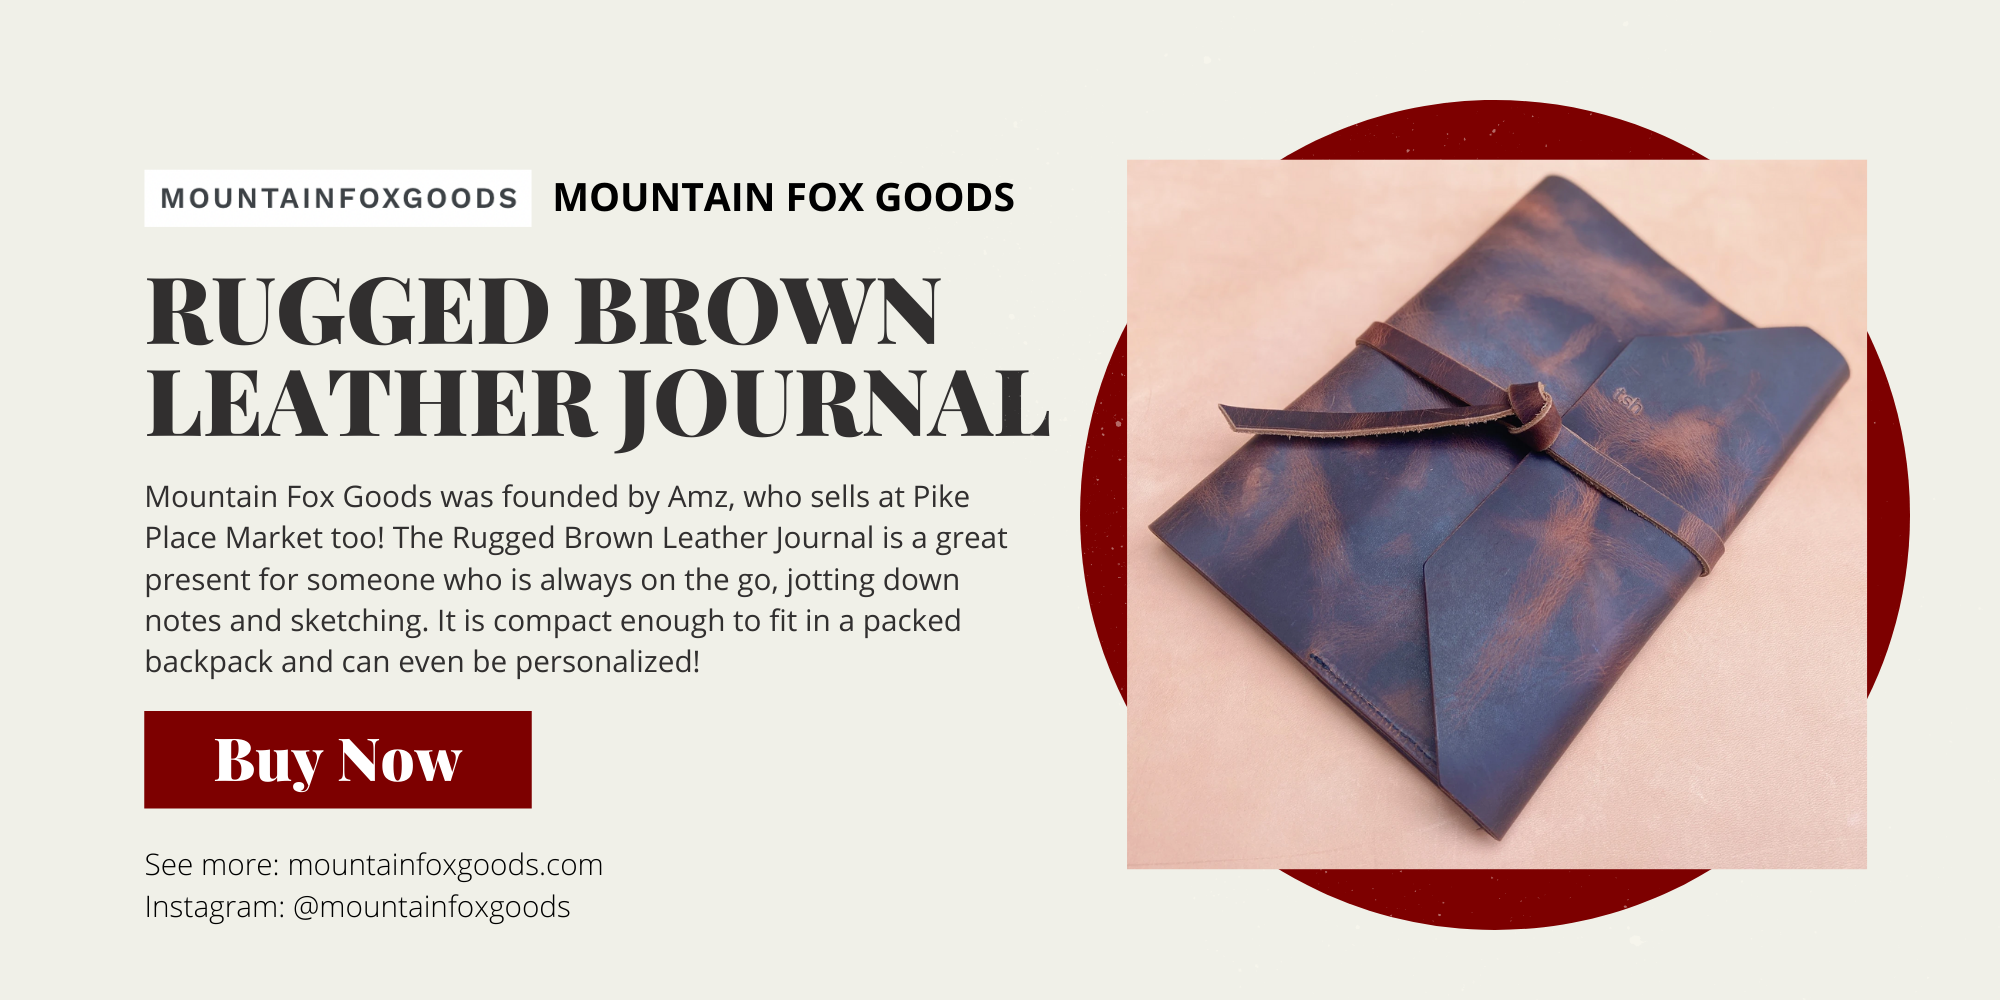 Mountain Fox Goods Rugged Brown Leather Journal